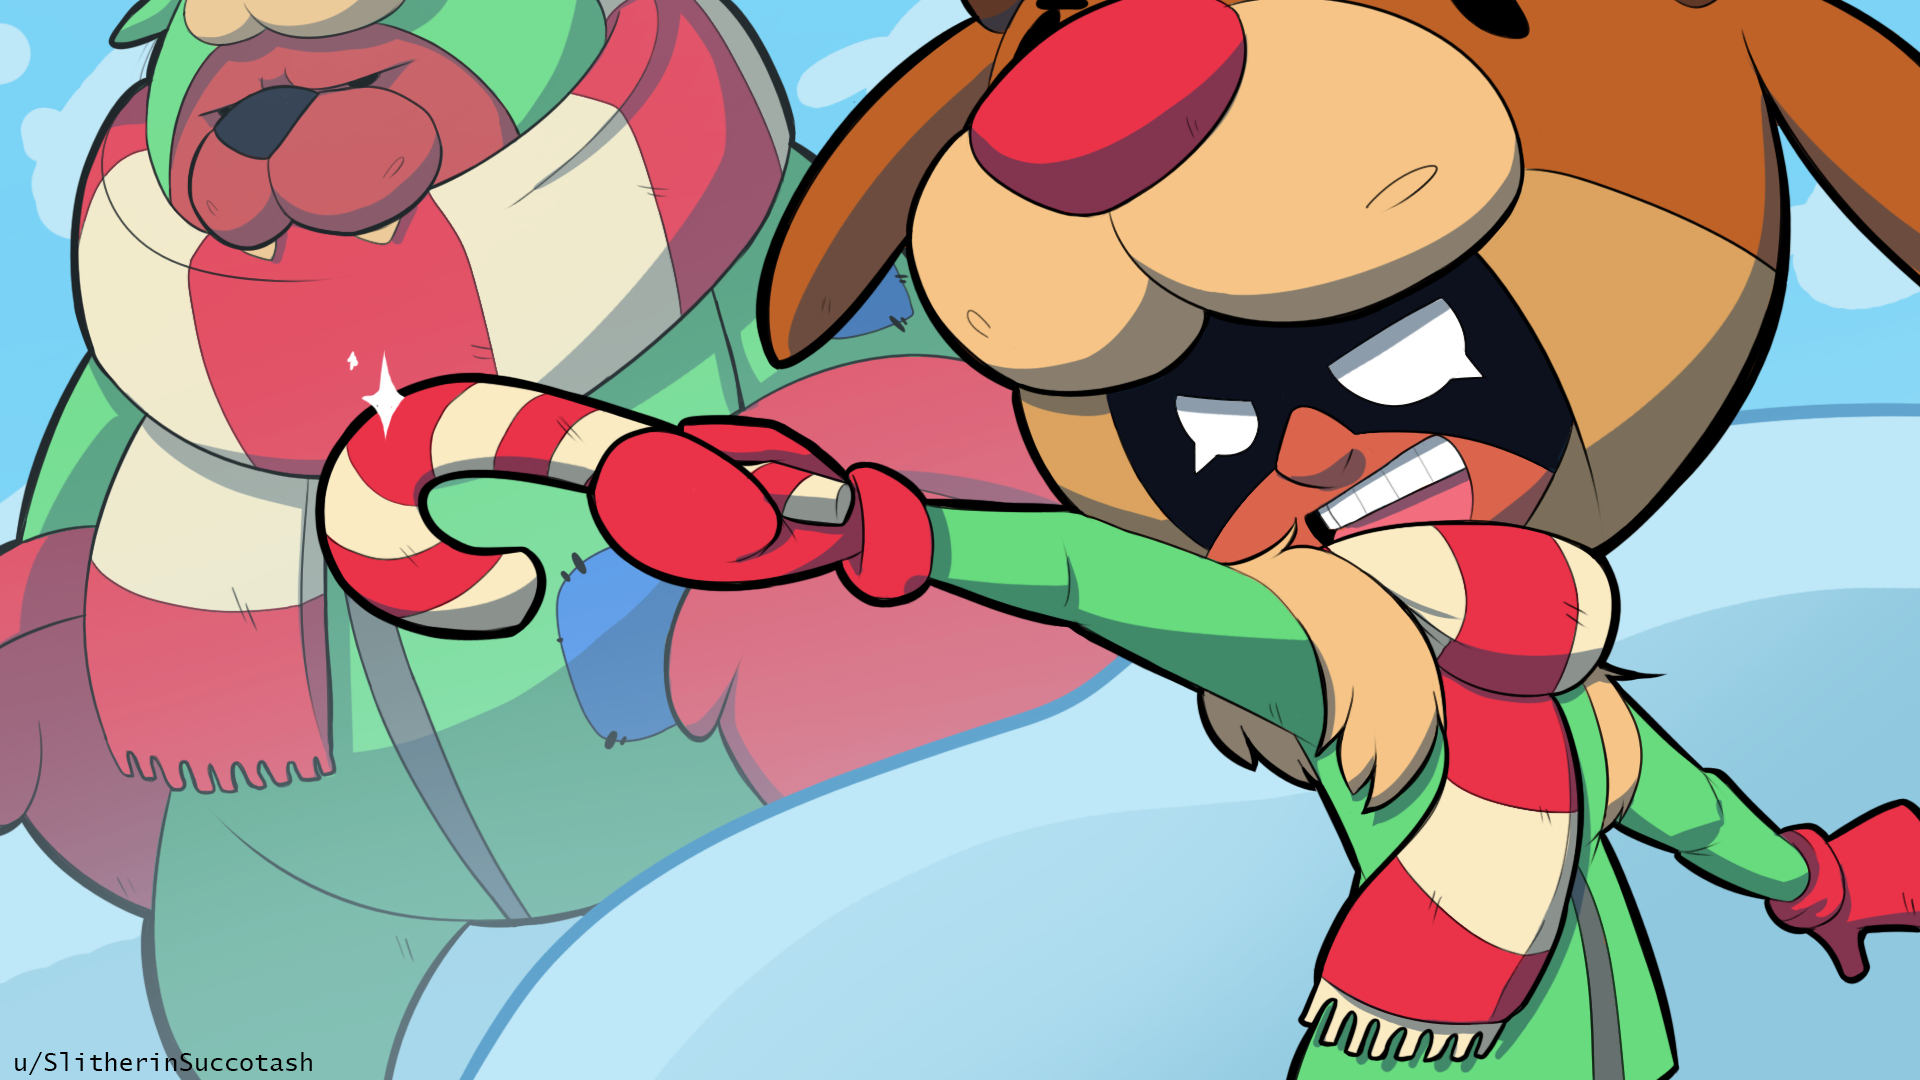 Art Happy Brawlidays! Here's a Red Nose Nita wallpaper as a gift